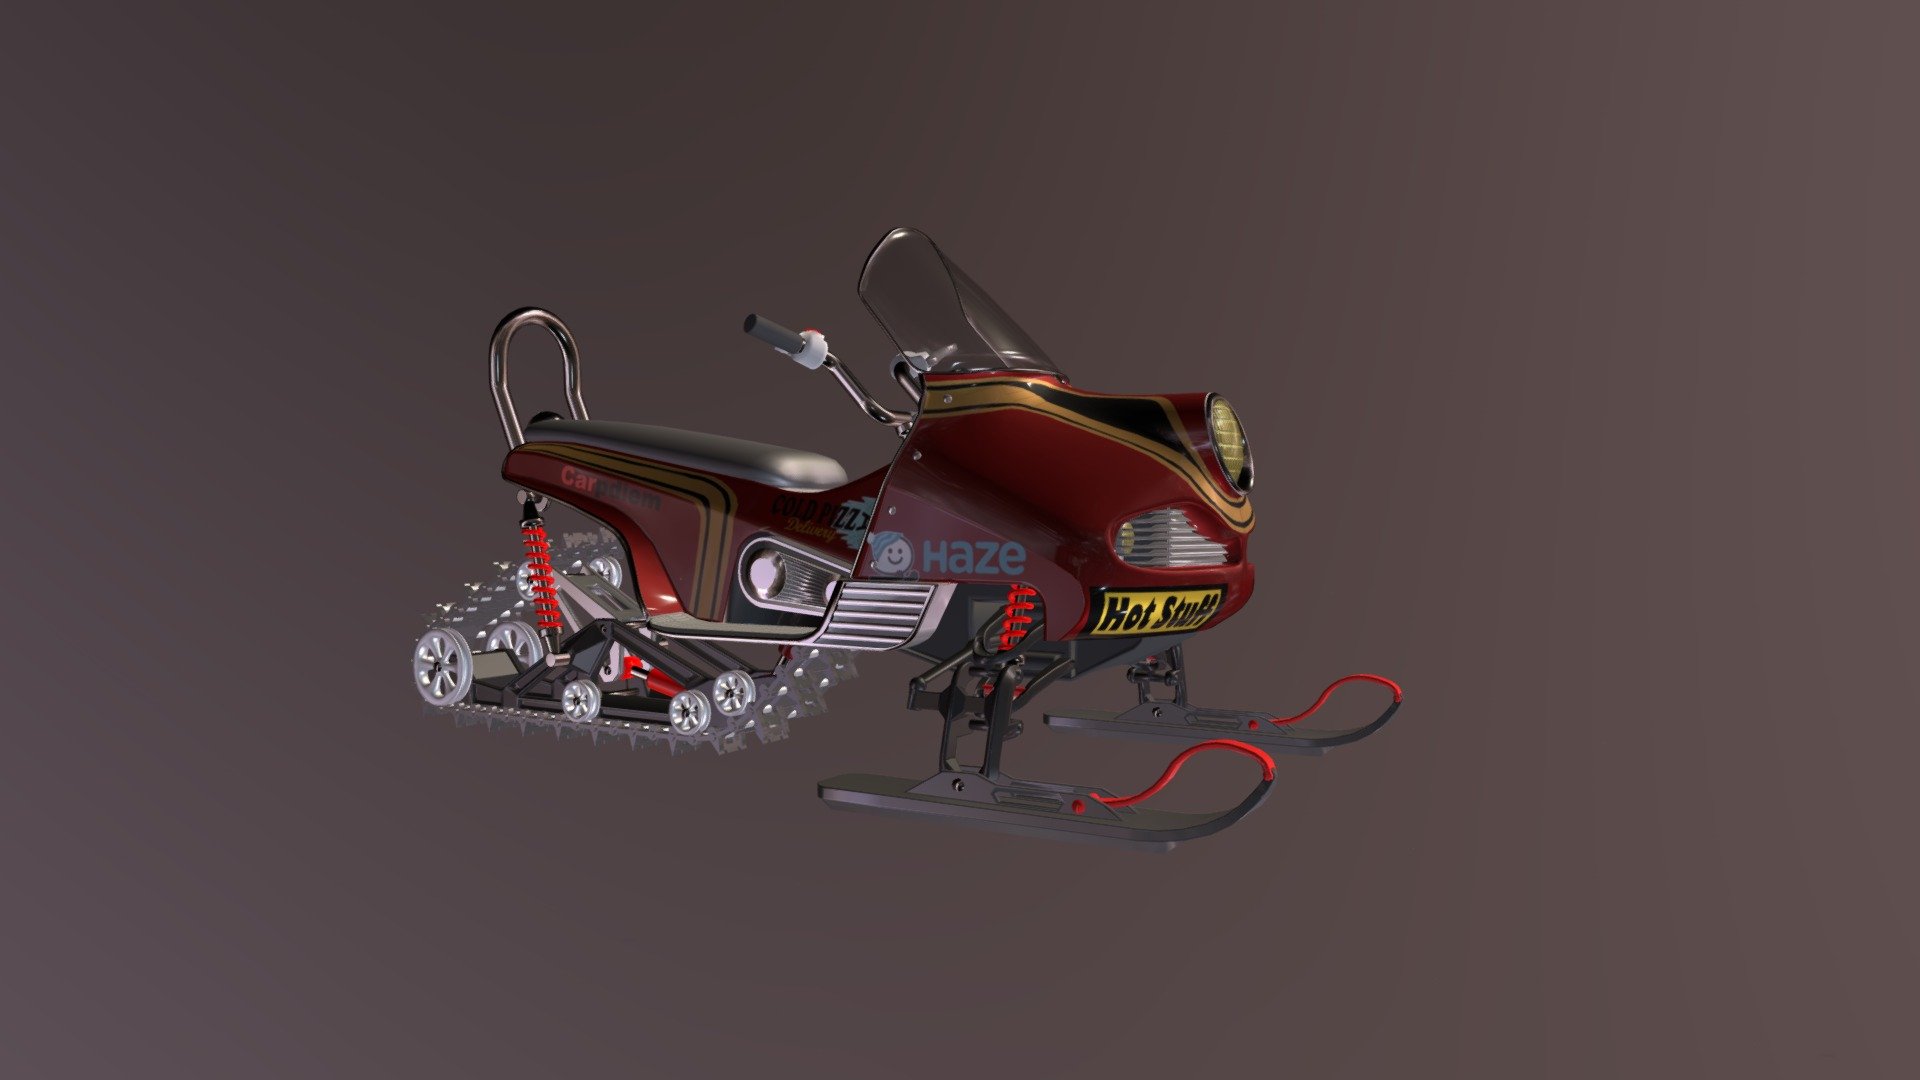 Concept and design by me. If you wish to put it to good use, contact me 3d model